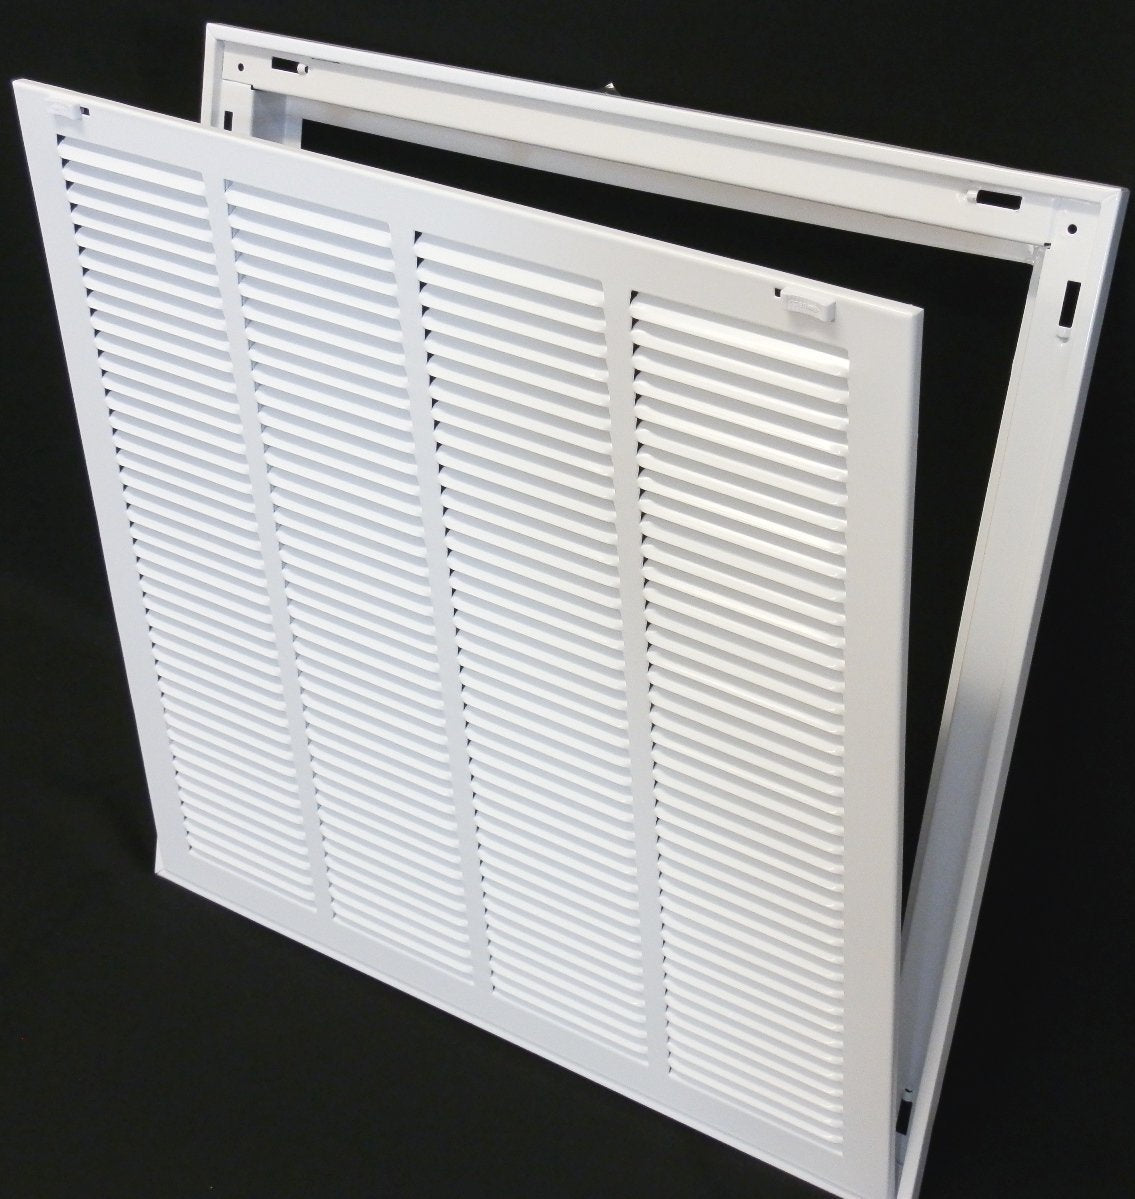 8&quot; X 28&quot; Steel Return Air Filter Grille for 1&quot; Filter - Removable Frame - [Outer Dimensions: 10 5/8&quot; X 30 5/8&quot;]